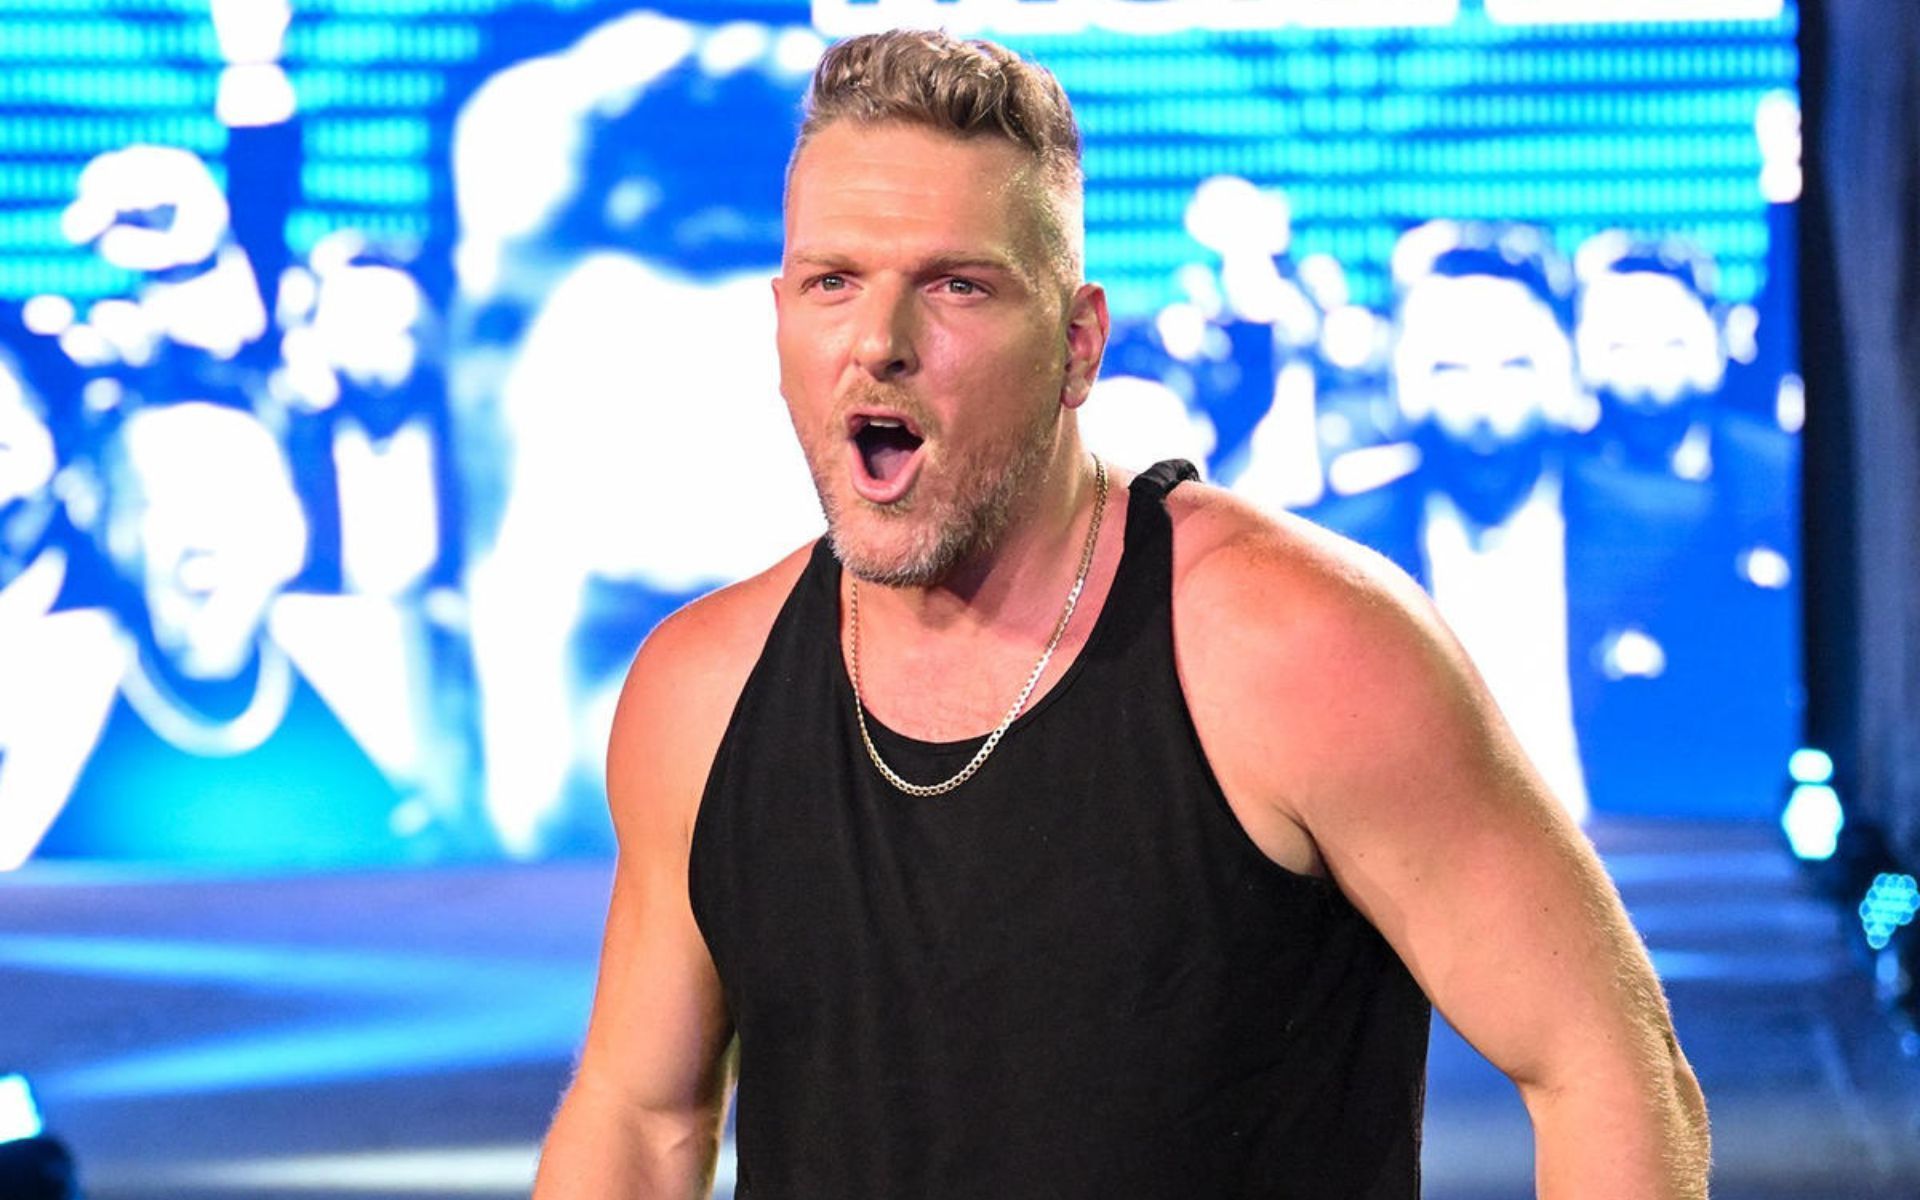 Pat McAfee recently took time off from WWE!